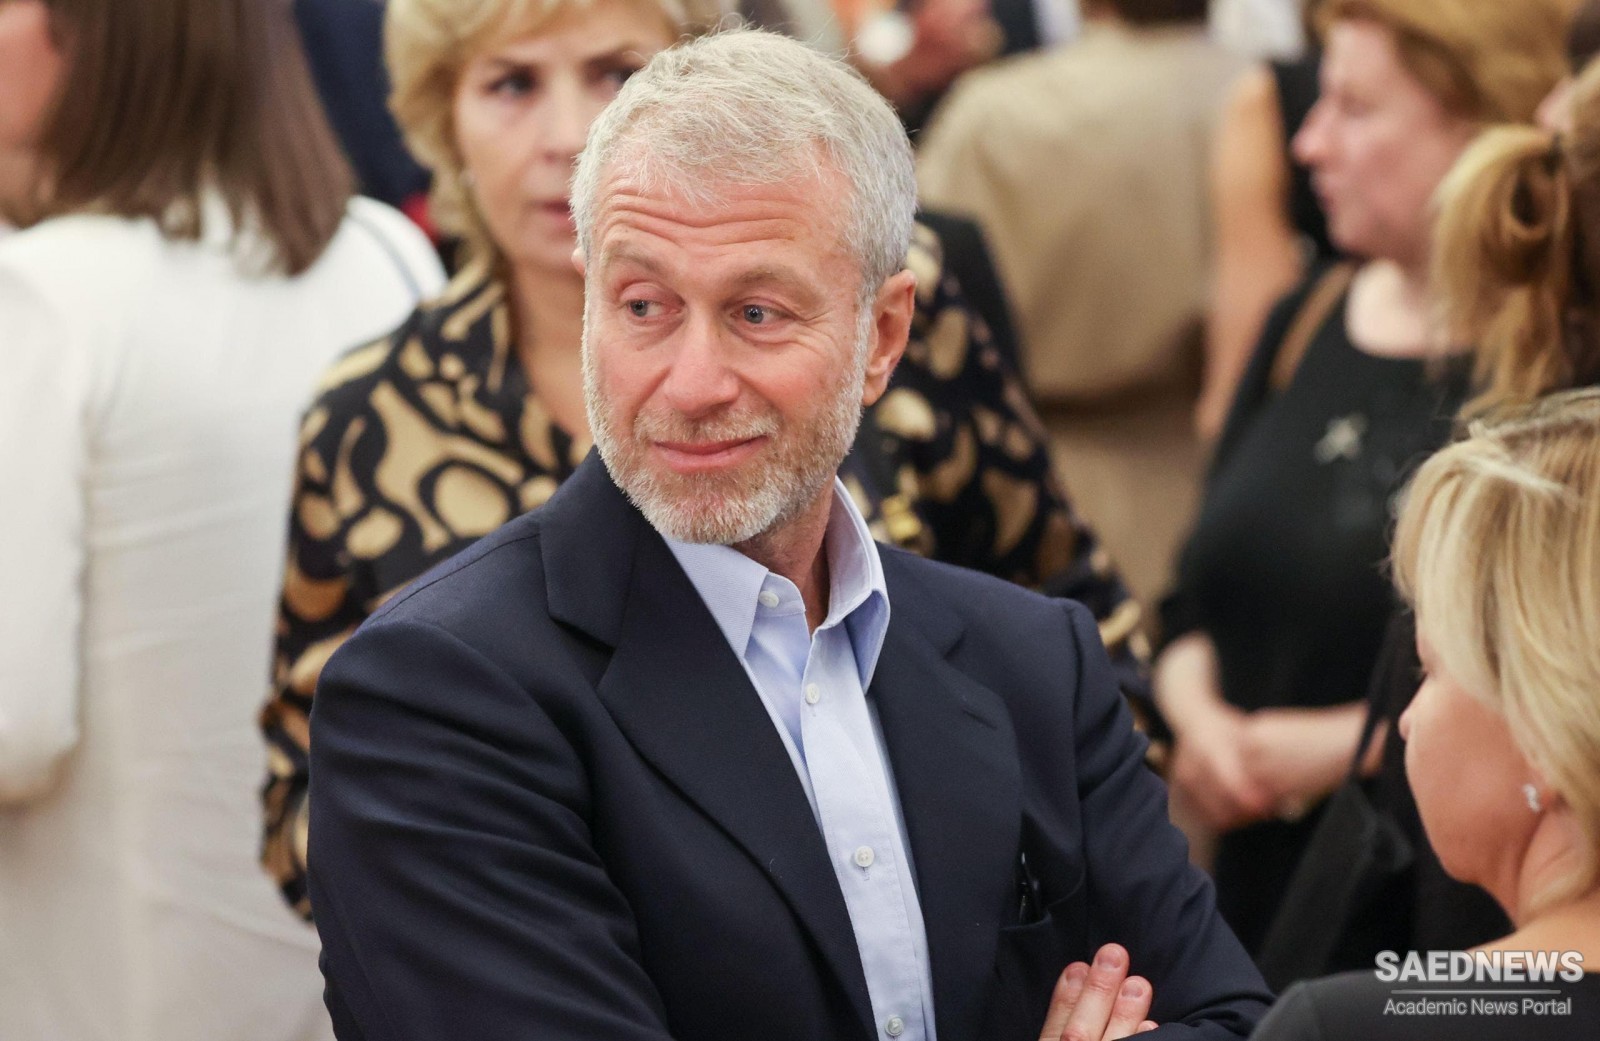 Abramovich suffered symptoms of suspected poisoning: Reports